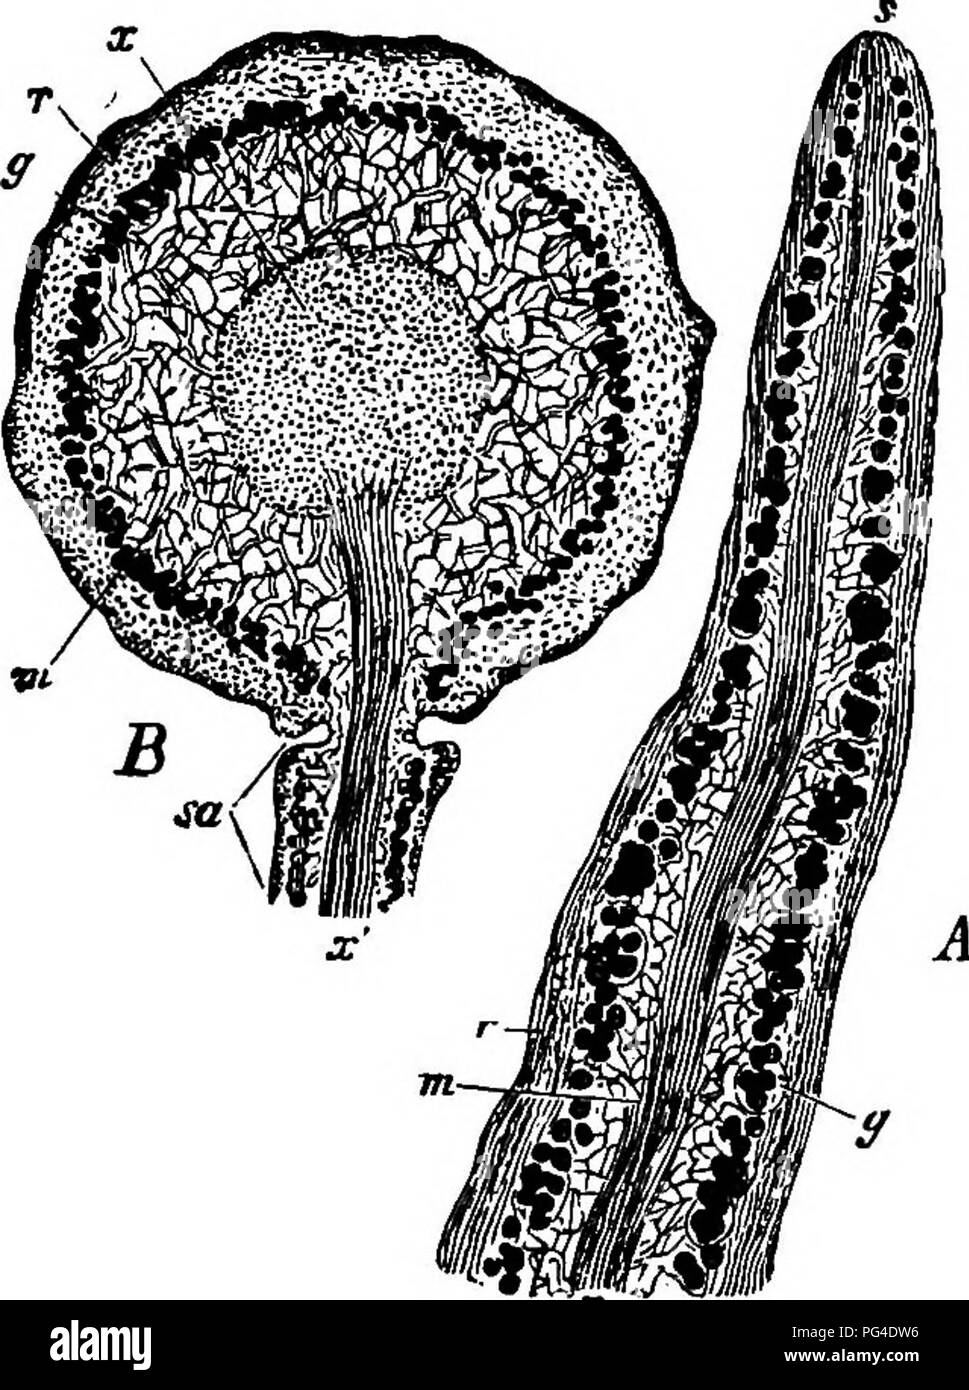 . Comparative morphology and biology of the fungi, mycetozoa and bacteria . Plant morphology; Fungi; Myxomycetes; Bacteriology. 402 DIVISION III.—MODE OF LIFE OF THE FUNGI. thCTcfore be separated from it without much injury; and the crttstaceous (thallus crustaceus, lepodes), a flat crust on or in the substratum and adhering firmly to it at least by its whole under surface, so that it cannot be separated from it without injury. The genera Cladonia and Stereocaulon are peculiar, having shrub-like formations (podetia) rising from scaly or granular foliaceous bodies (the thallus or protothallus o Stock Photo